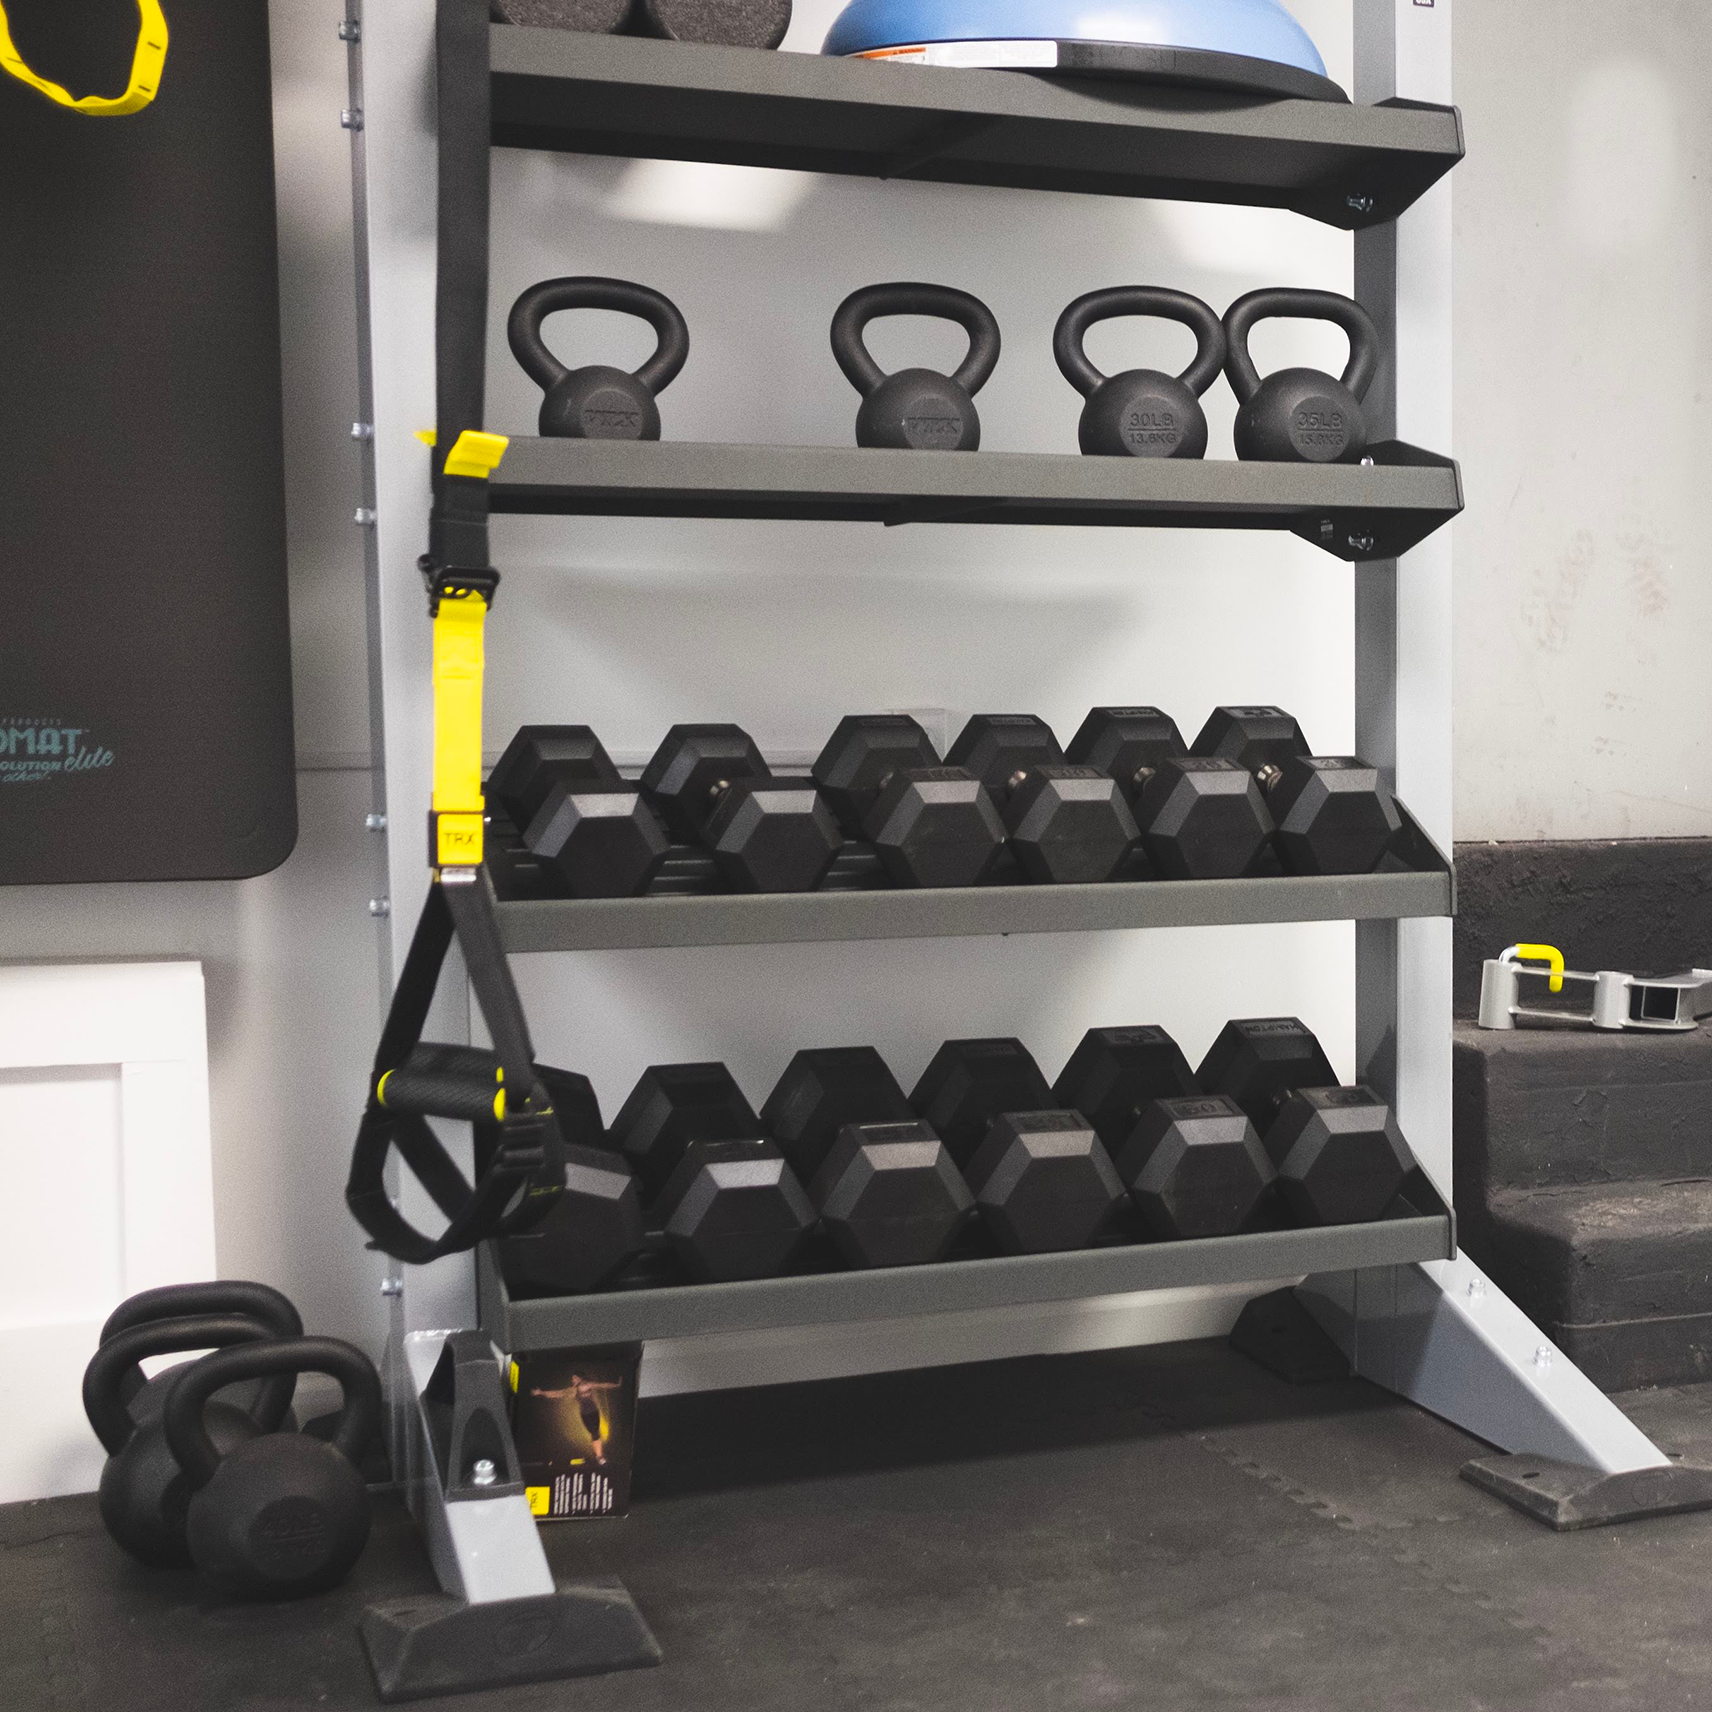 A women's fitness gym rack with kettlebells and weights on it.